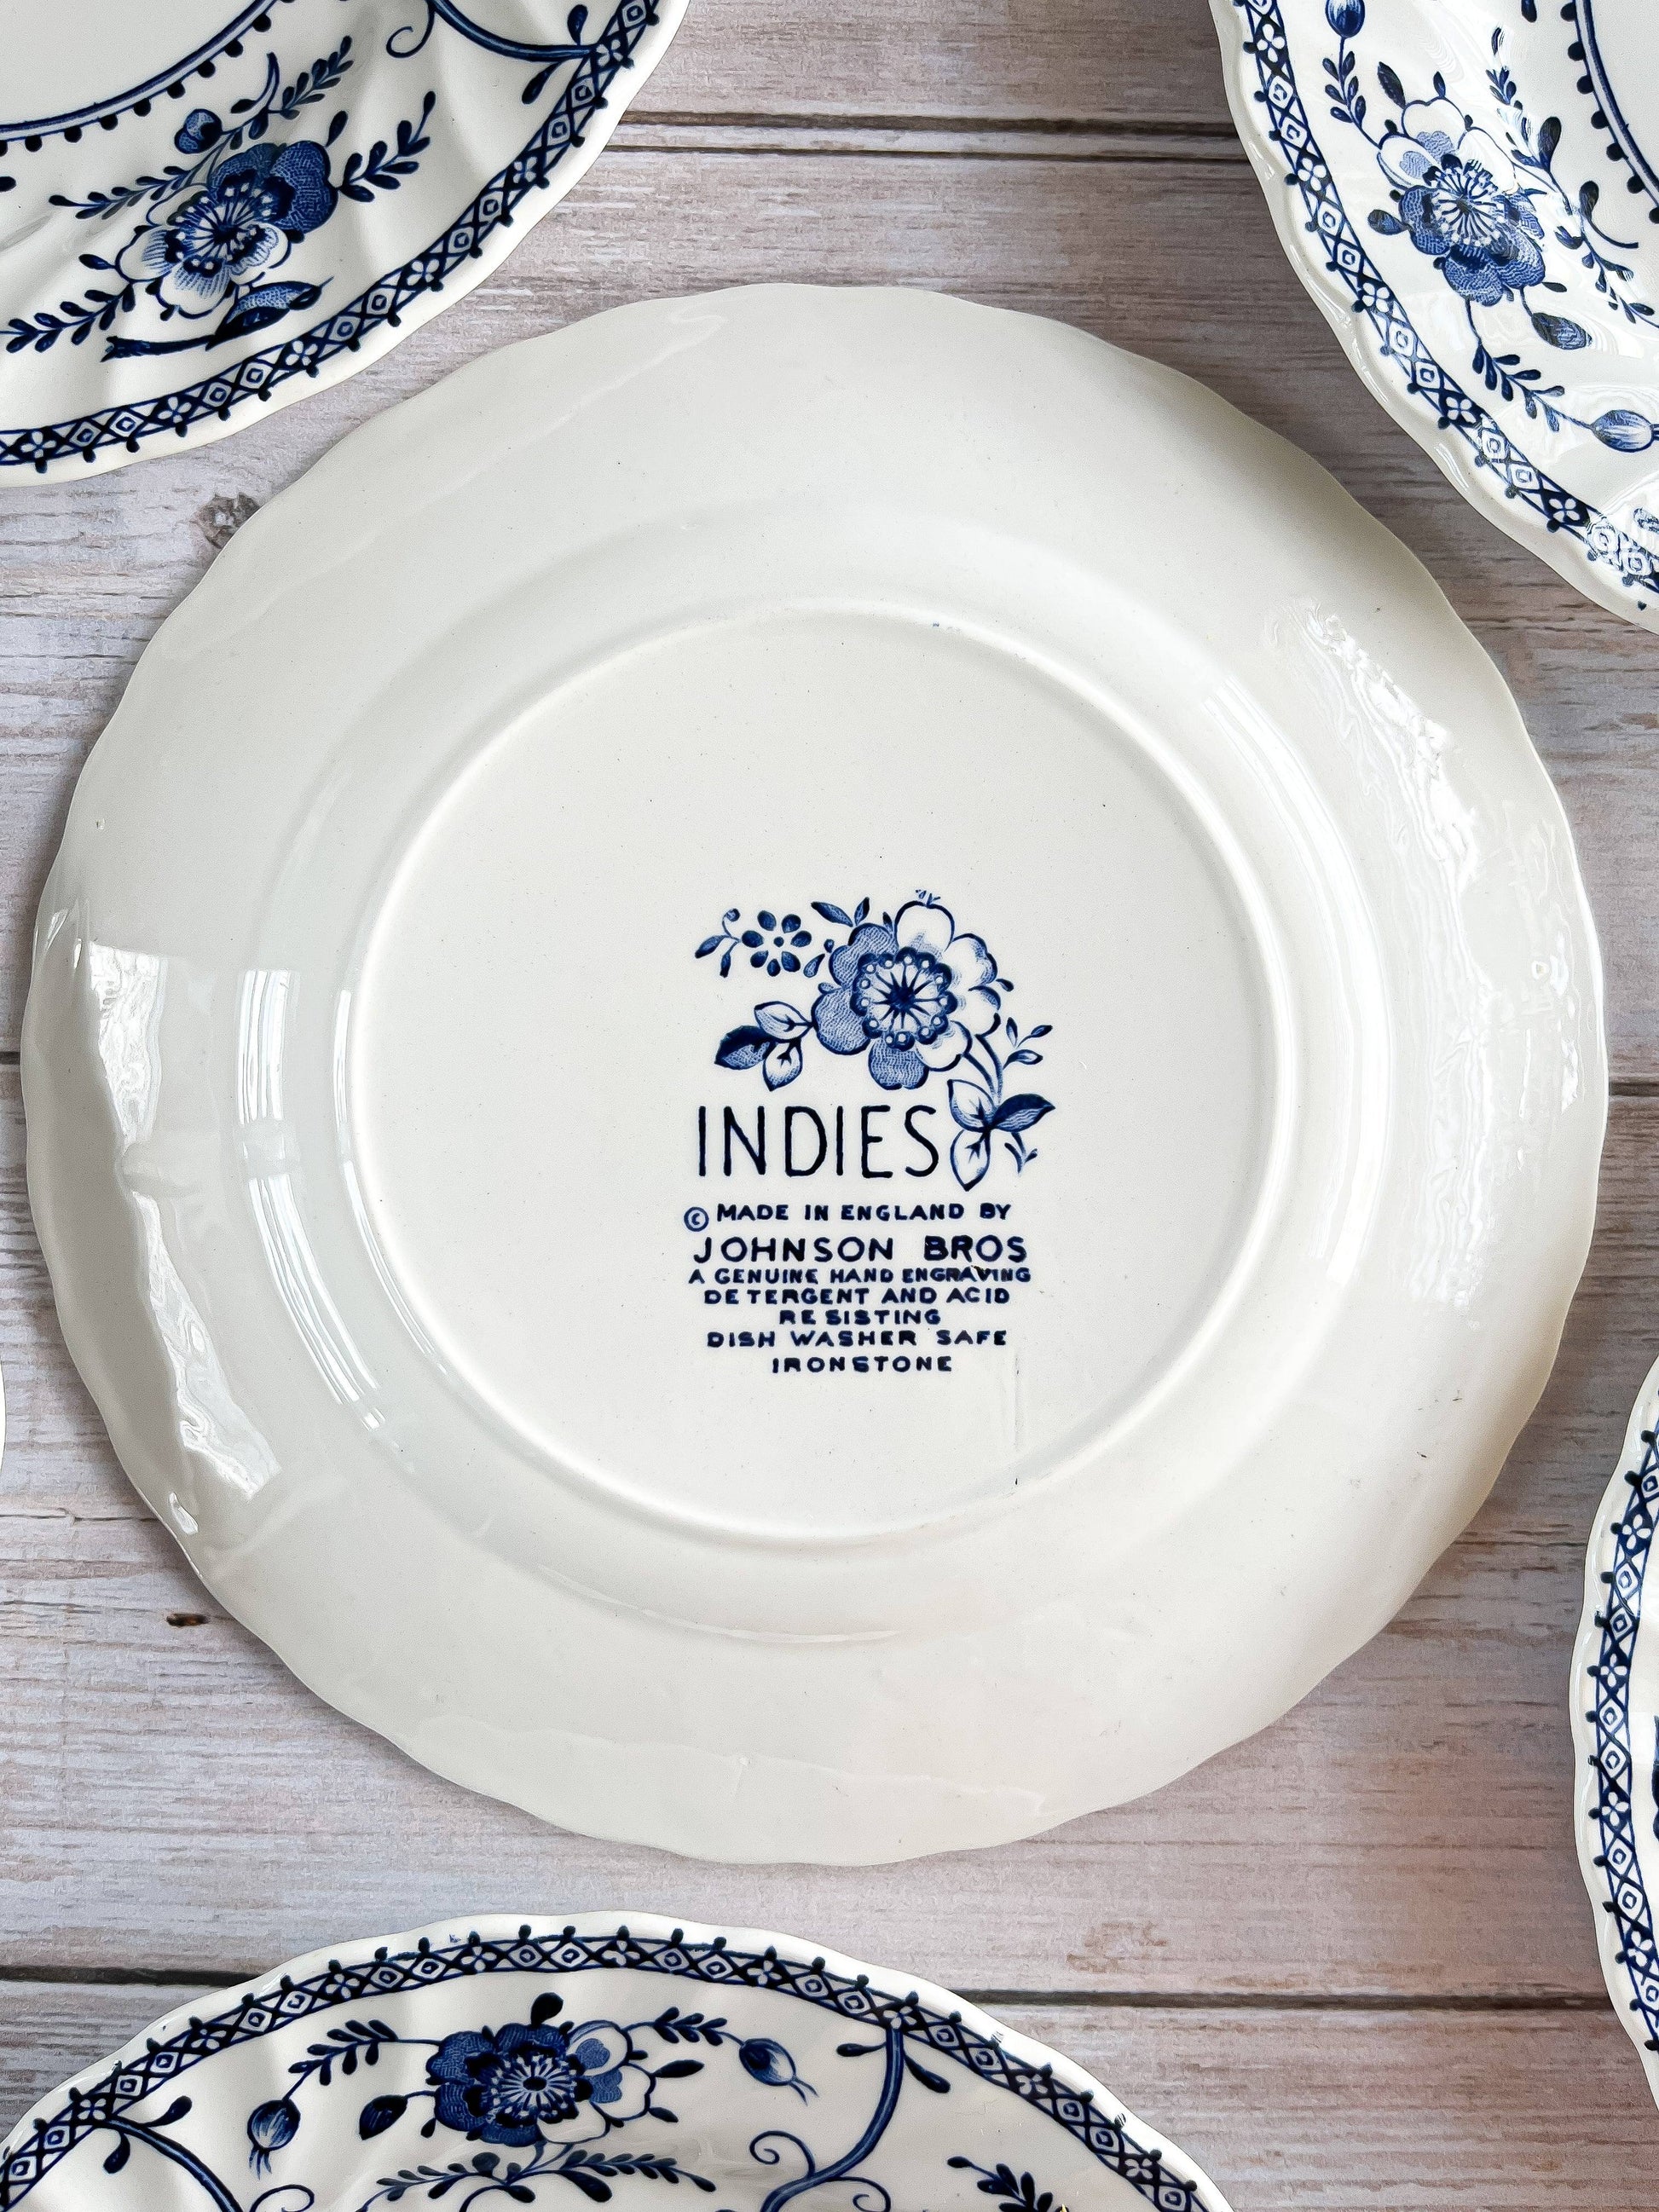 Johnson Bros Single Bread & Butter Plate - 'Indies' in Blue Collection - SOSC Home